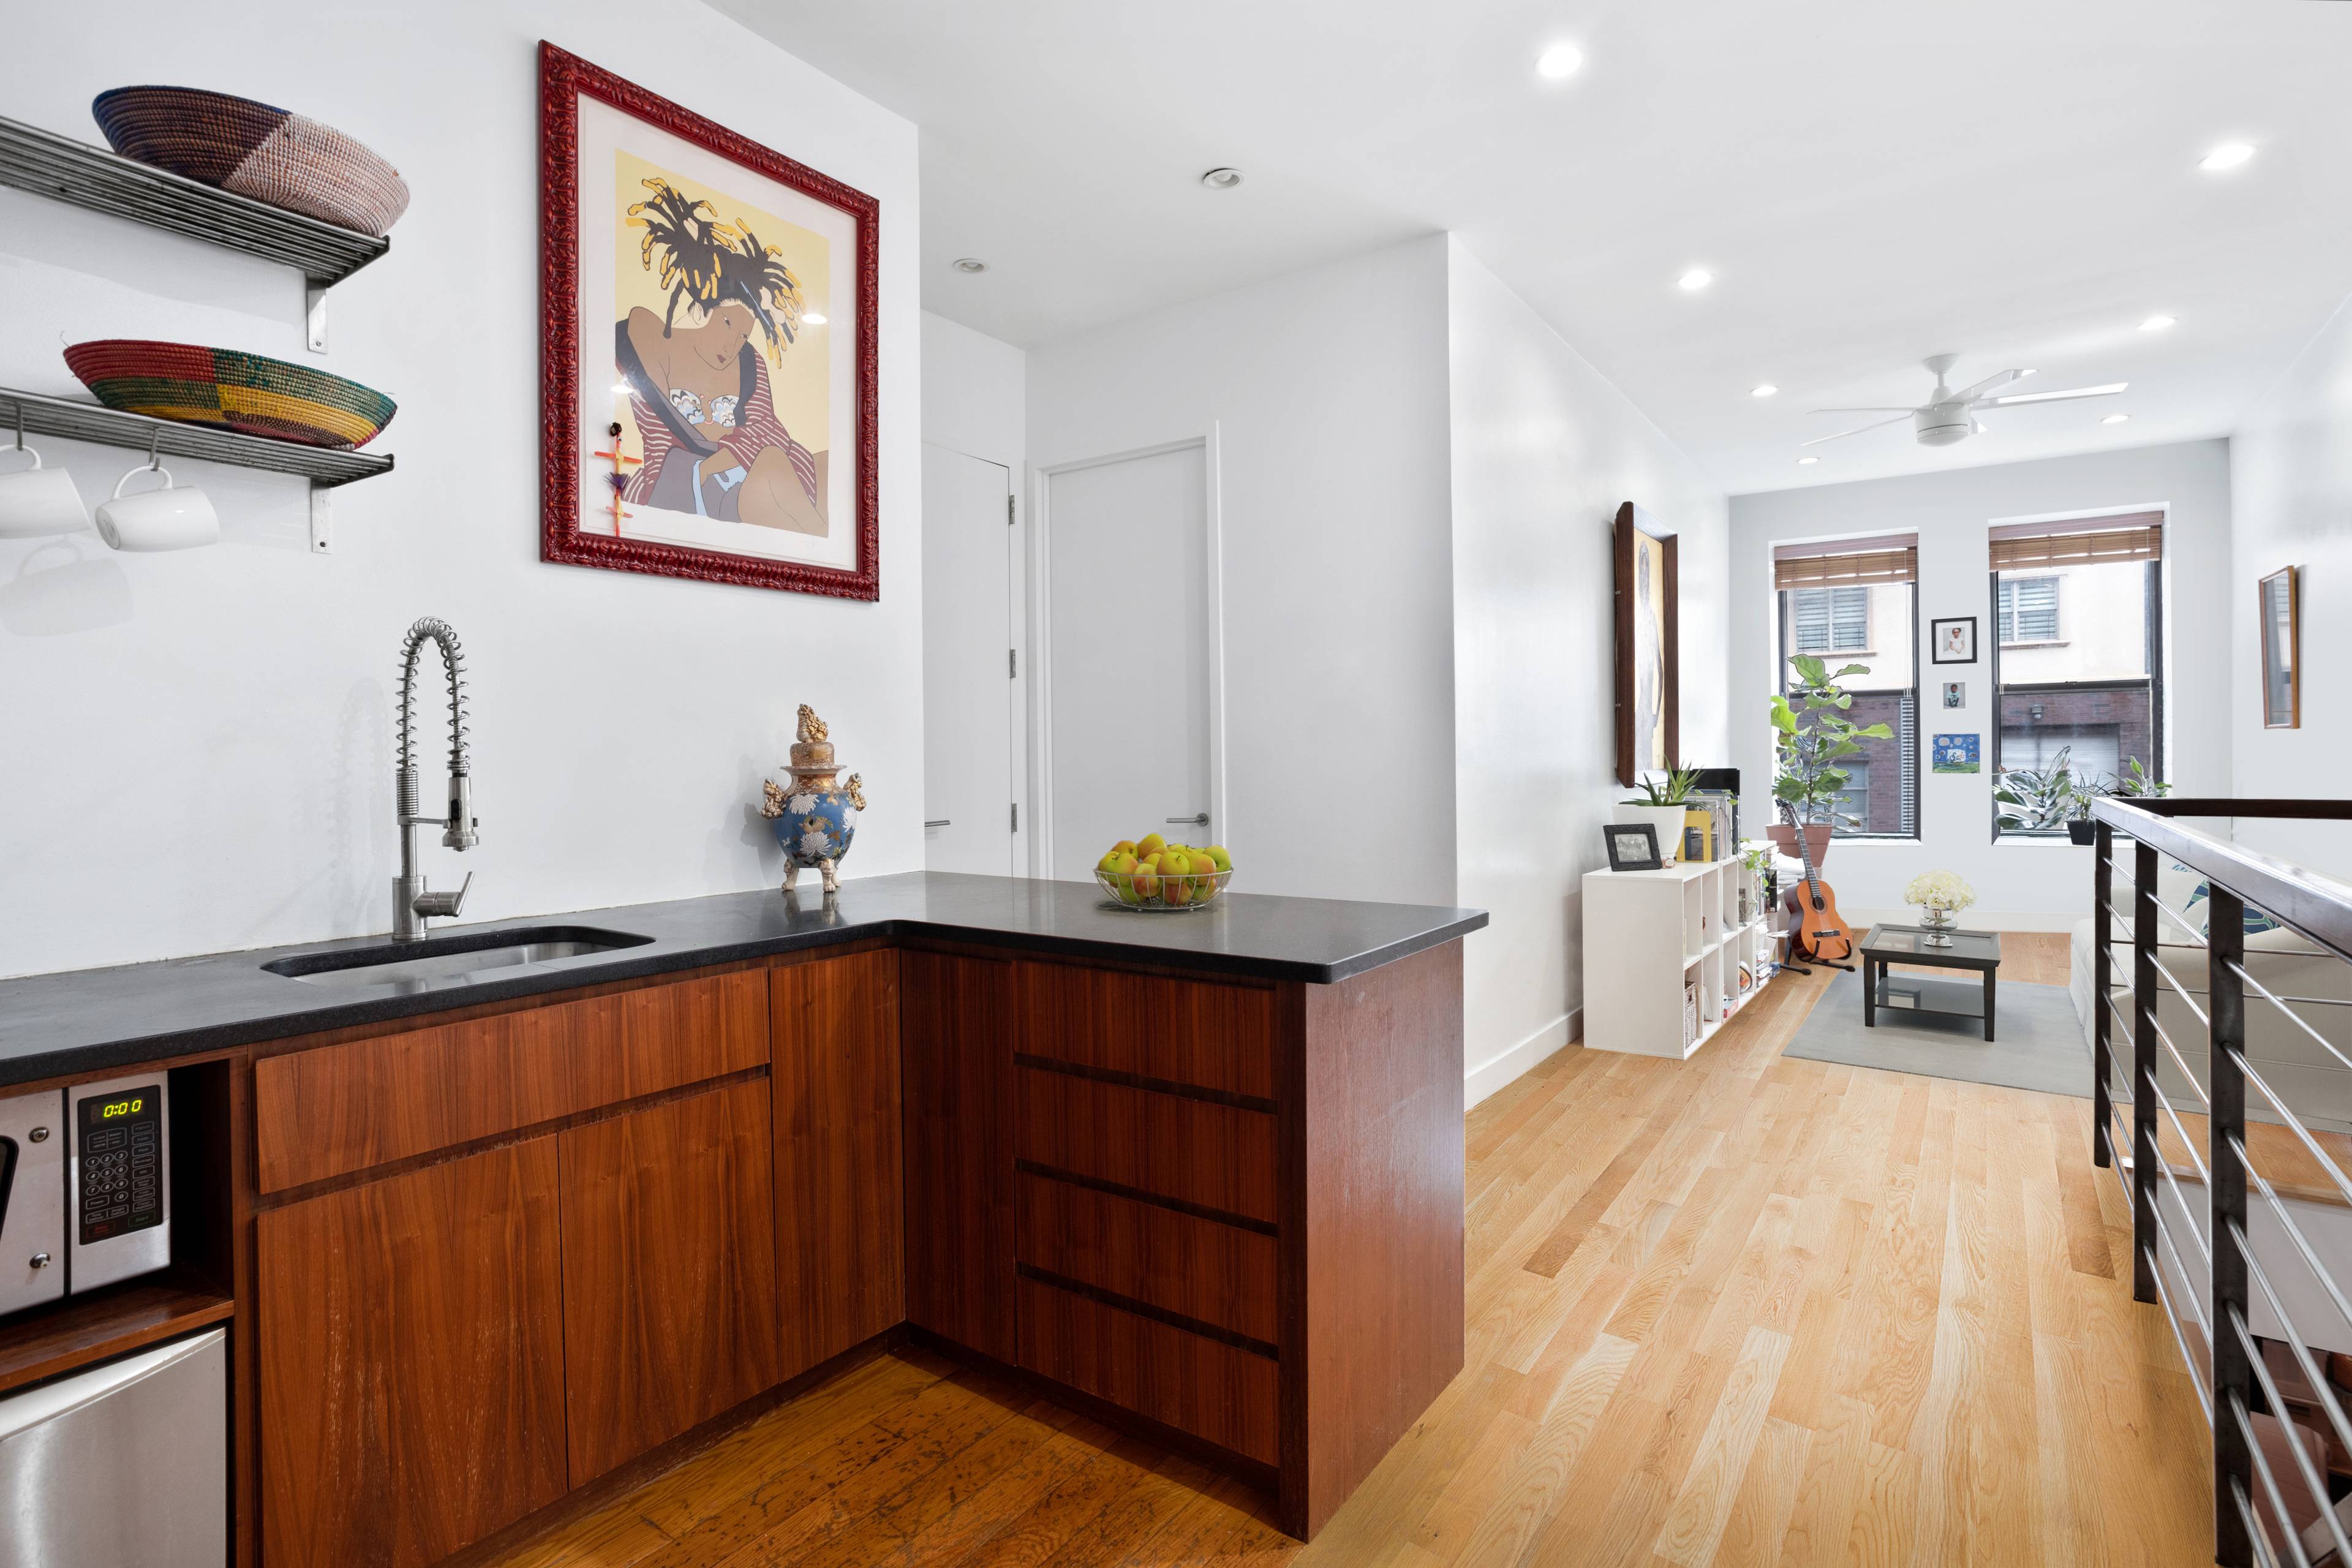 This expansive duplex is part of a unique prewar condo conversion infused with quality craftsmanship and charm.